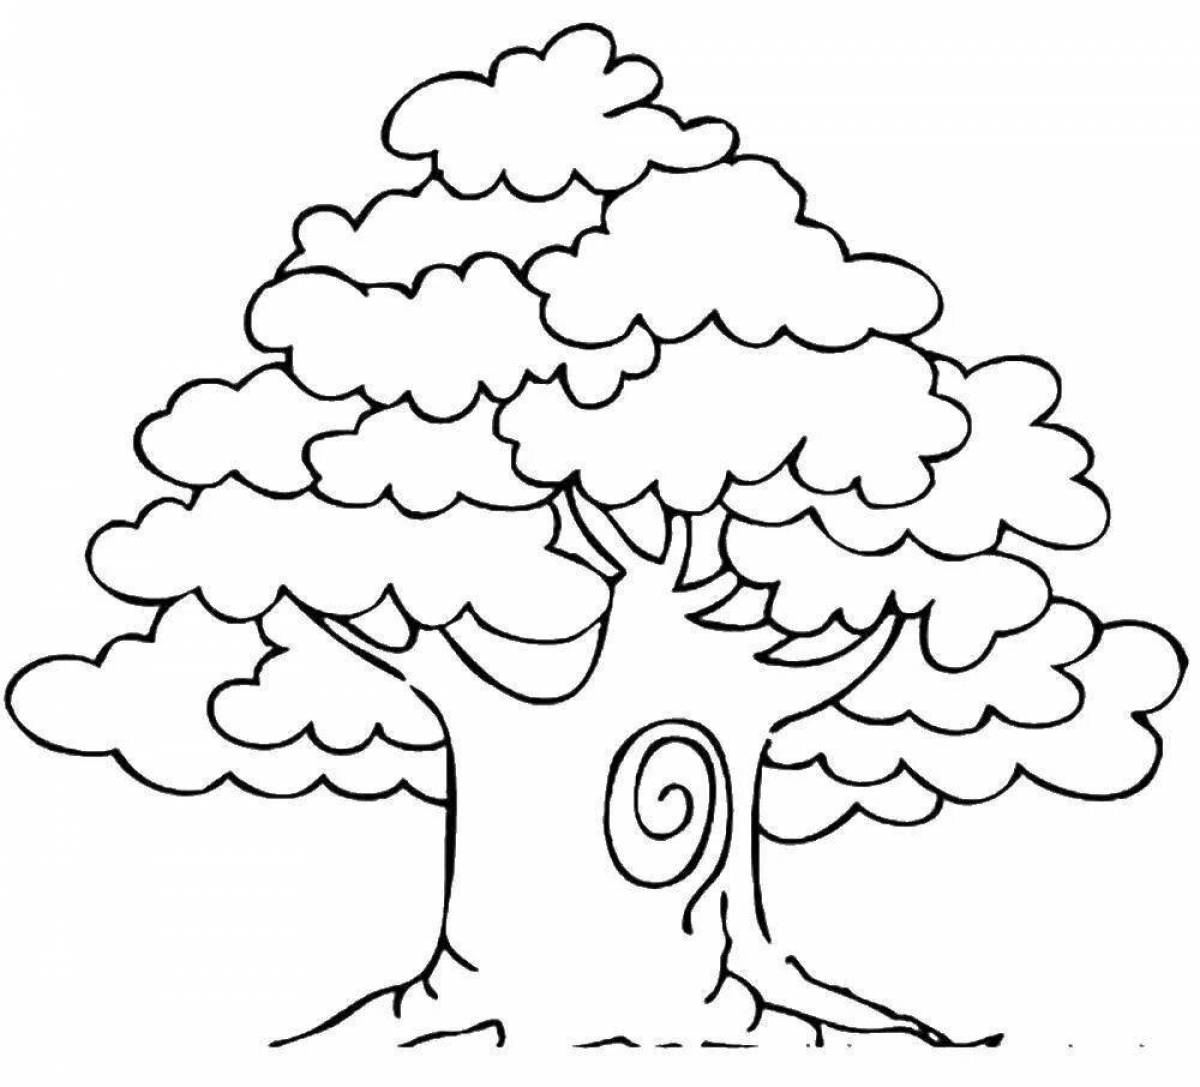 Glitter tree coloring page